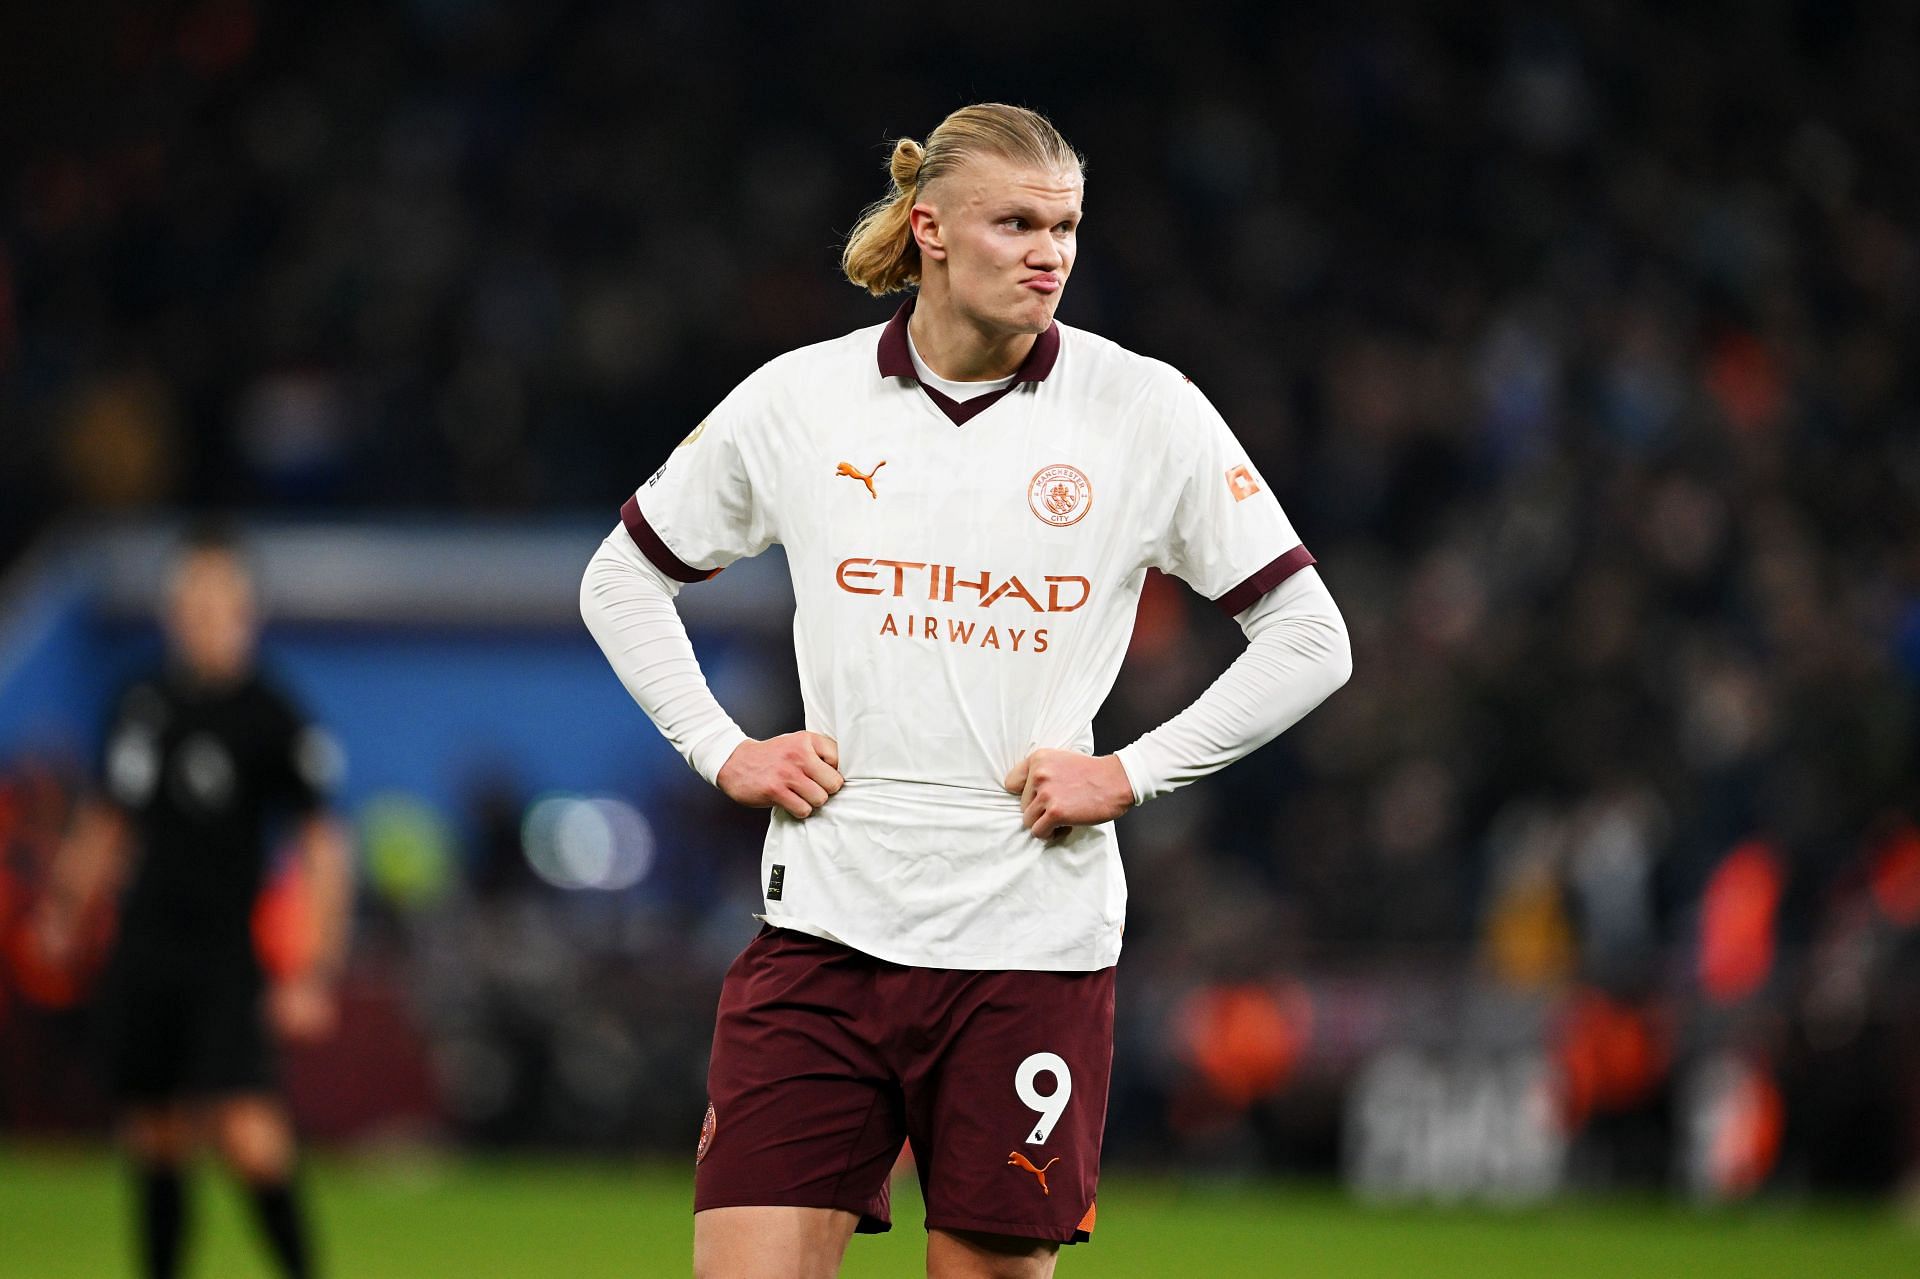 Erling Haaland has been in red-hot form since arriving at the Etihad.